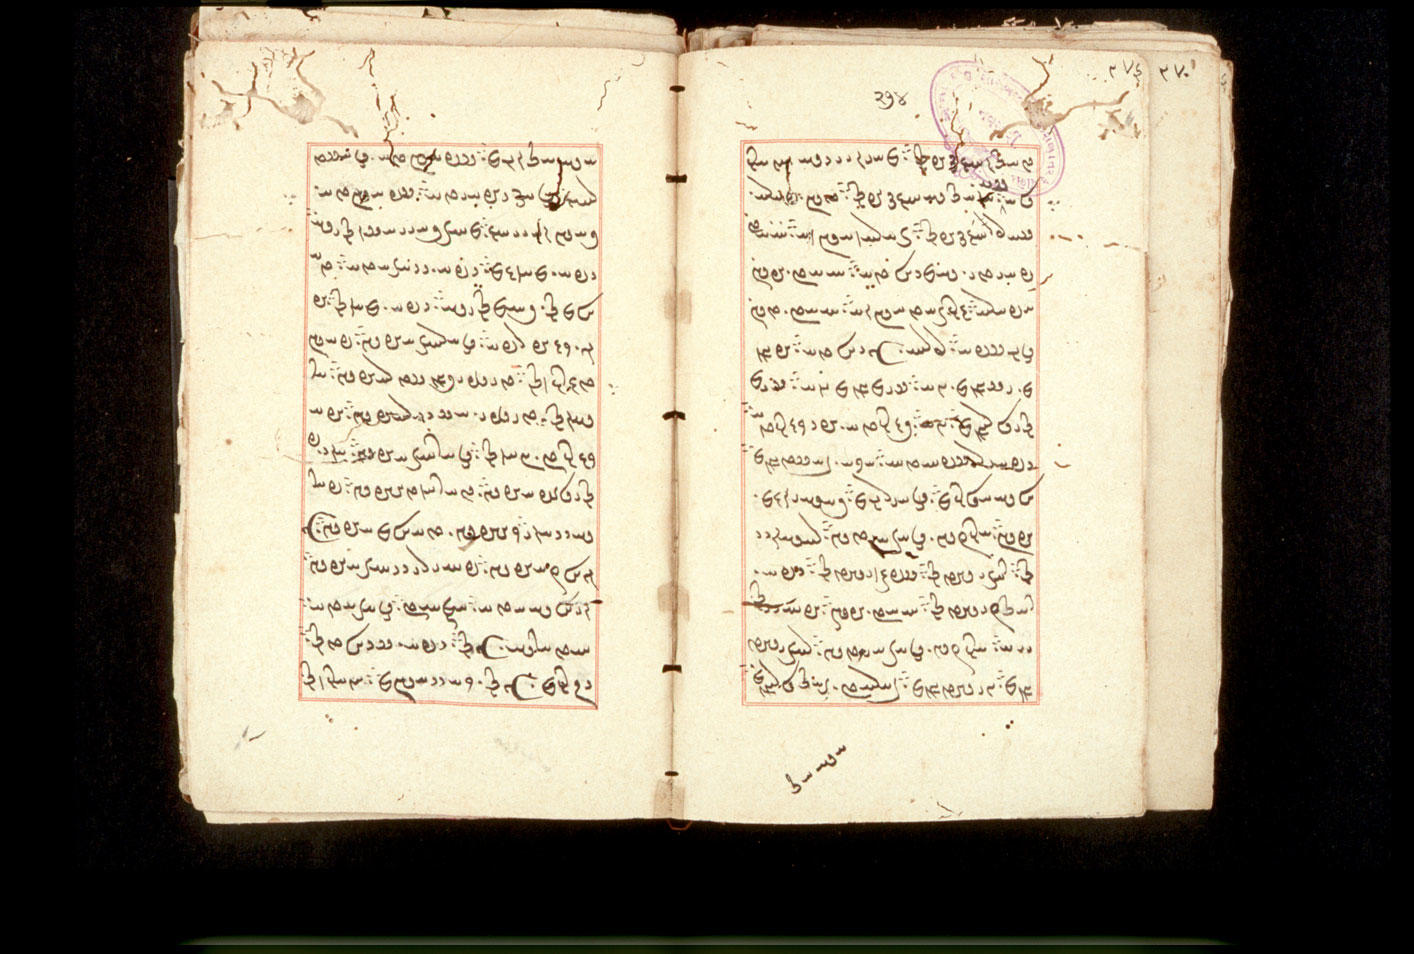 Folios 274v (right) and 275r (left)